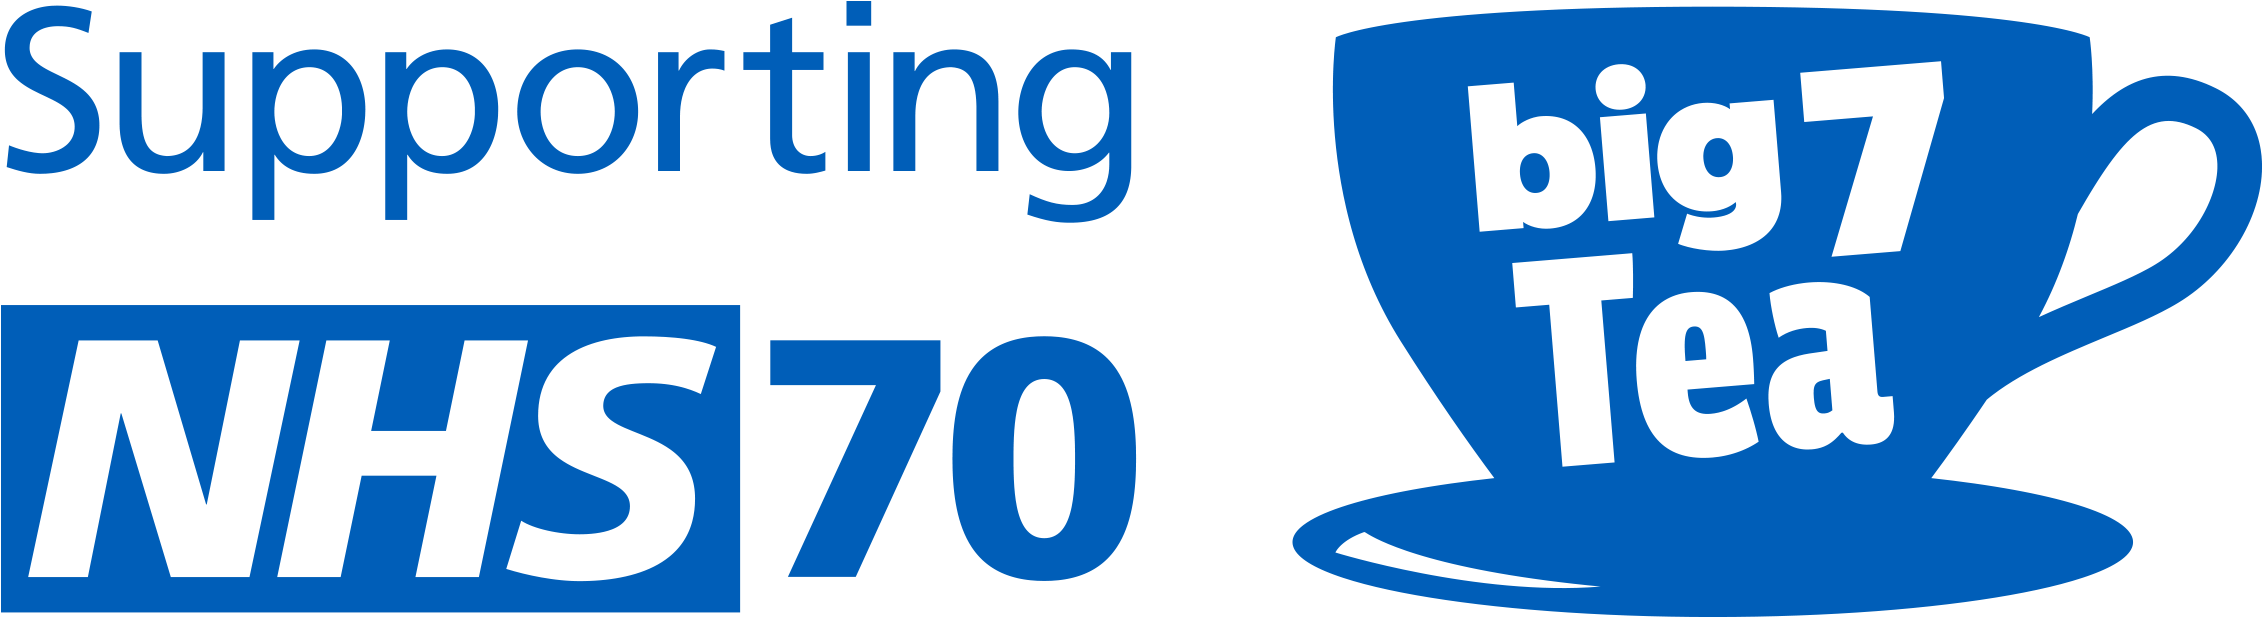 To Mark 70 Days Until The Nhs Turns 70, St George's - Big 7tea (2611x709)